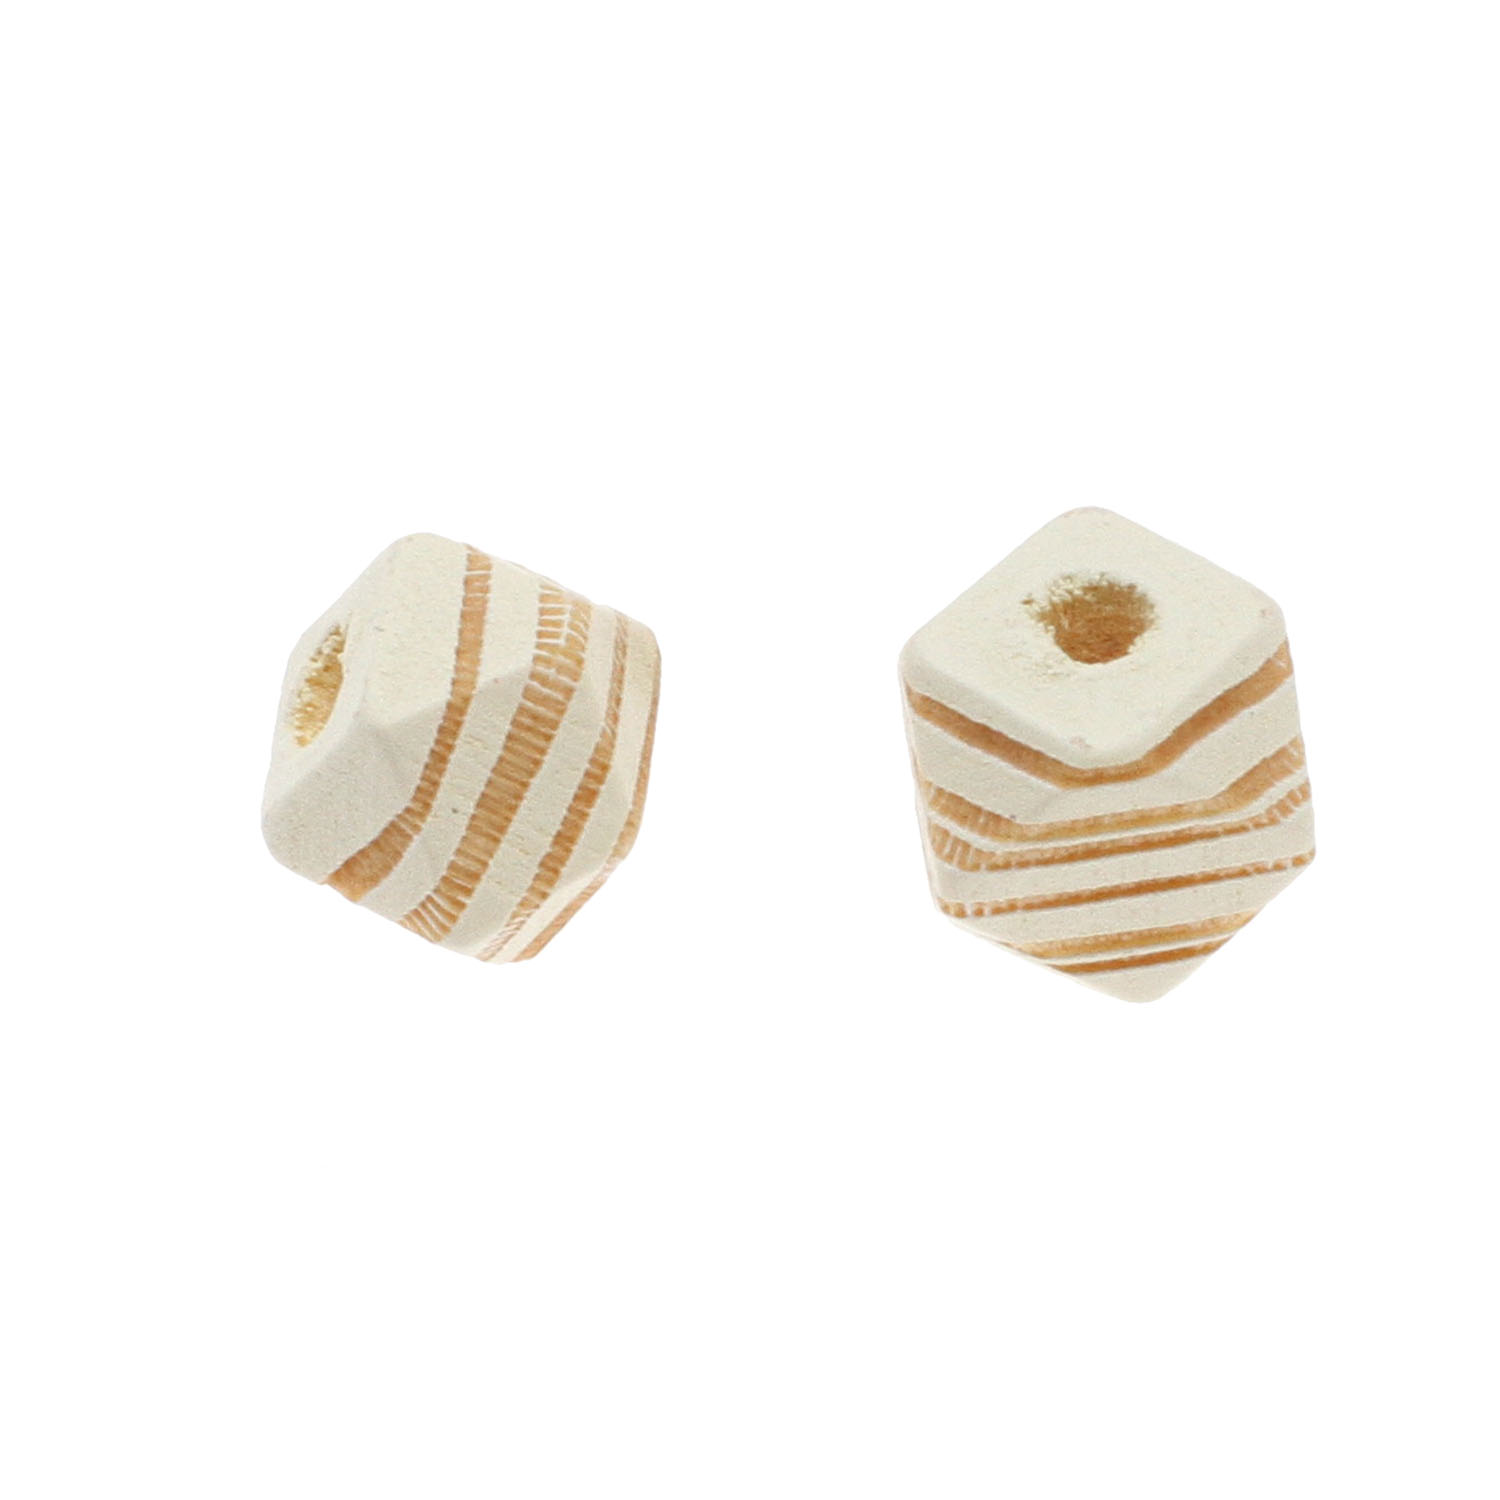 white, 12x12mm, Hole: 3mm